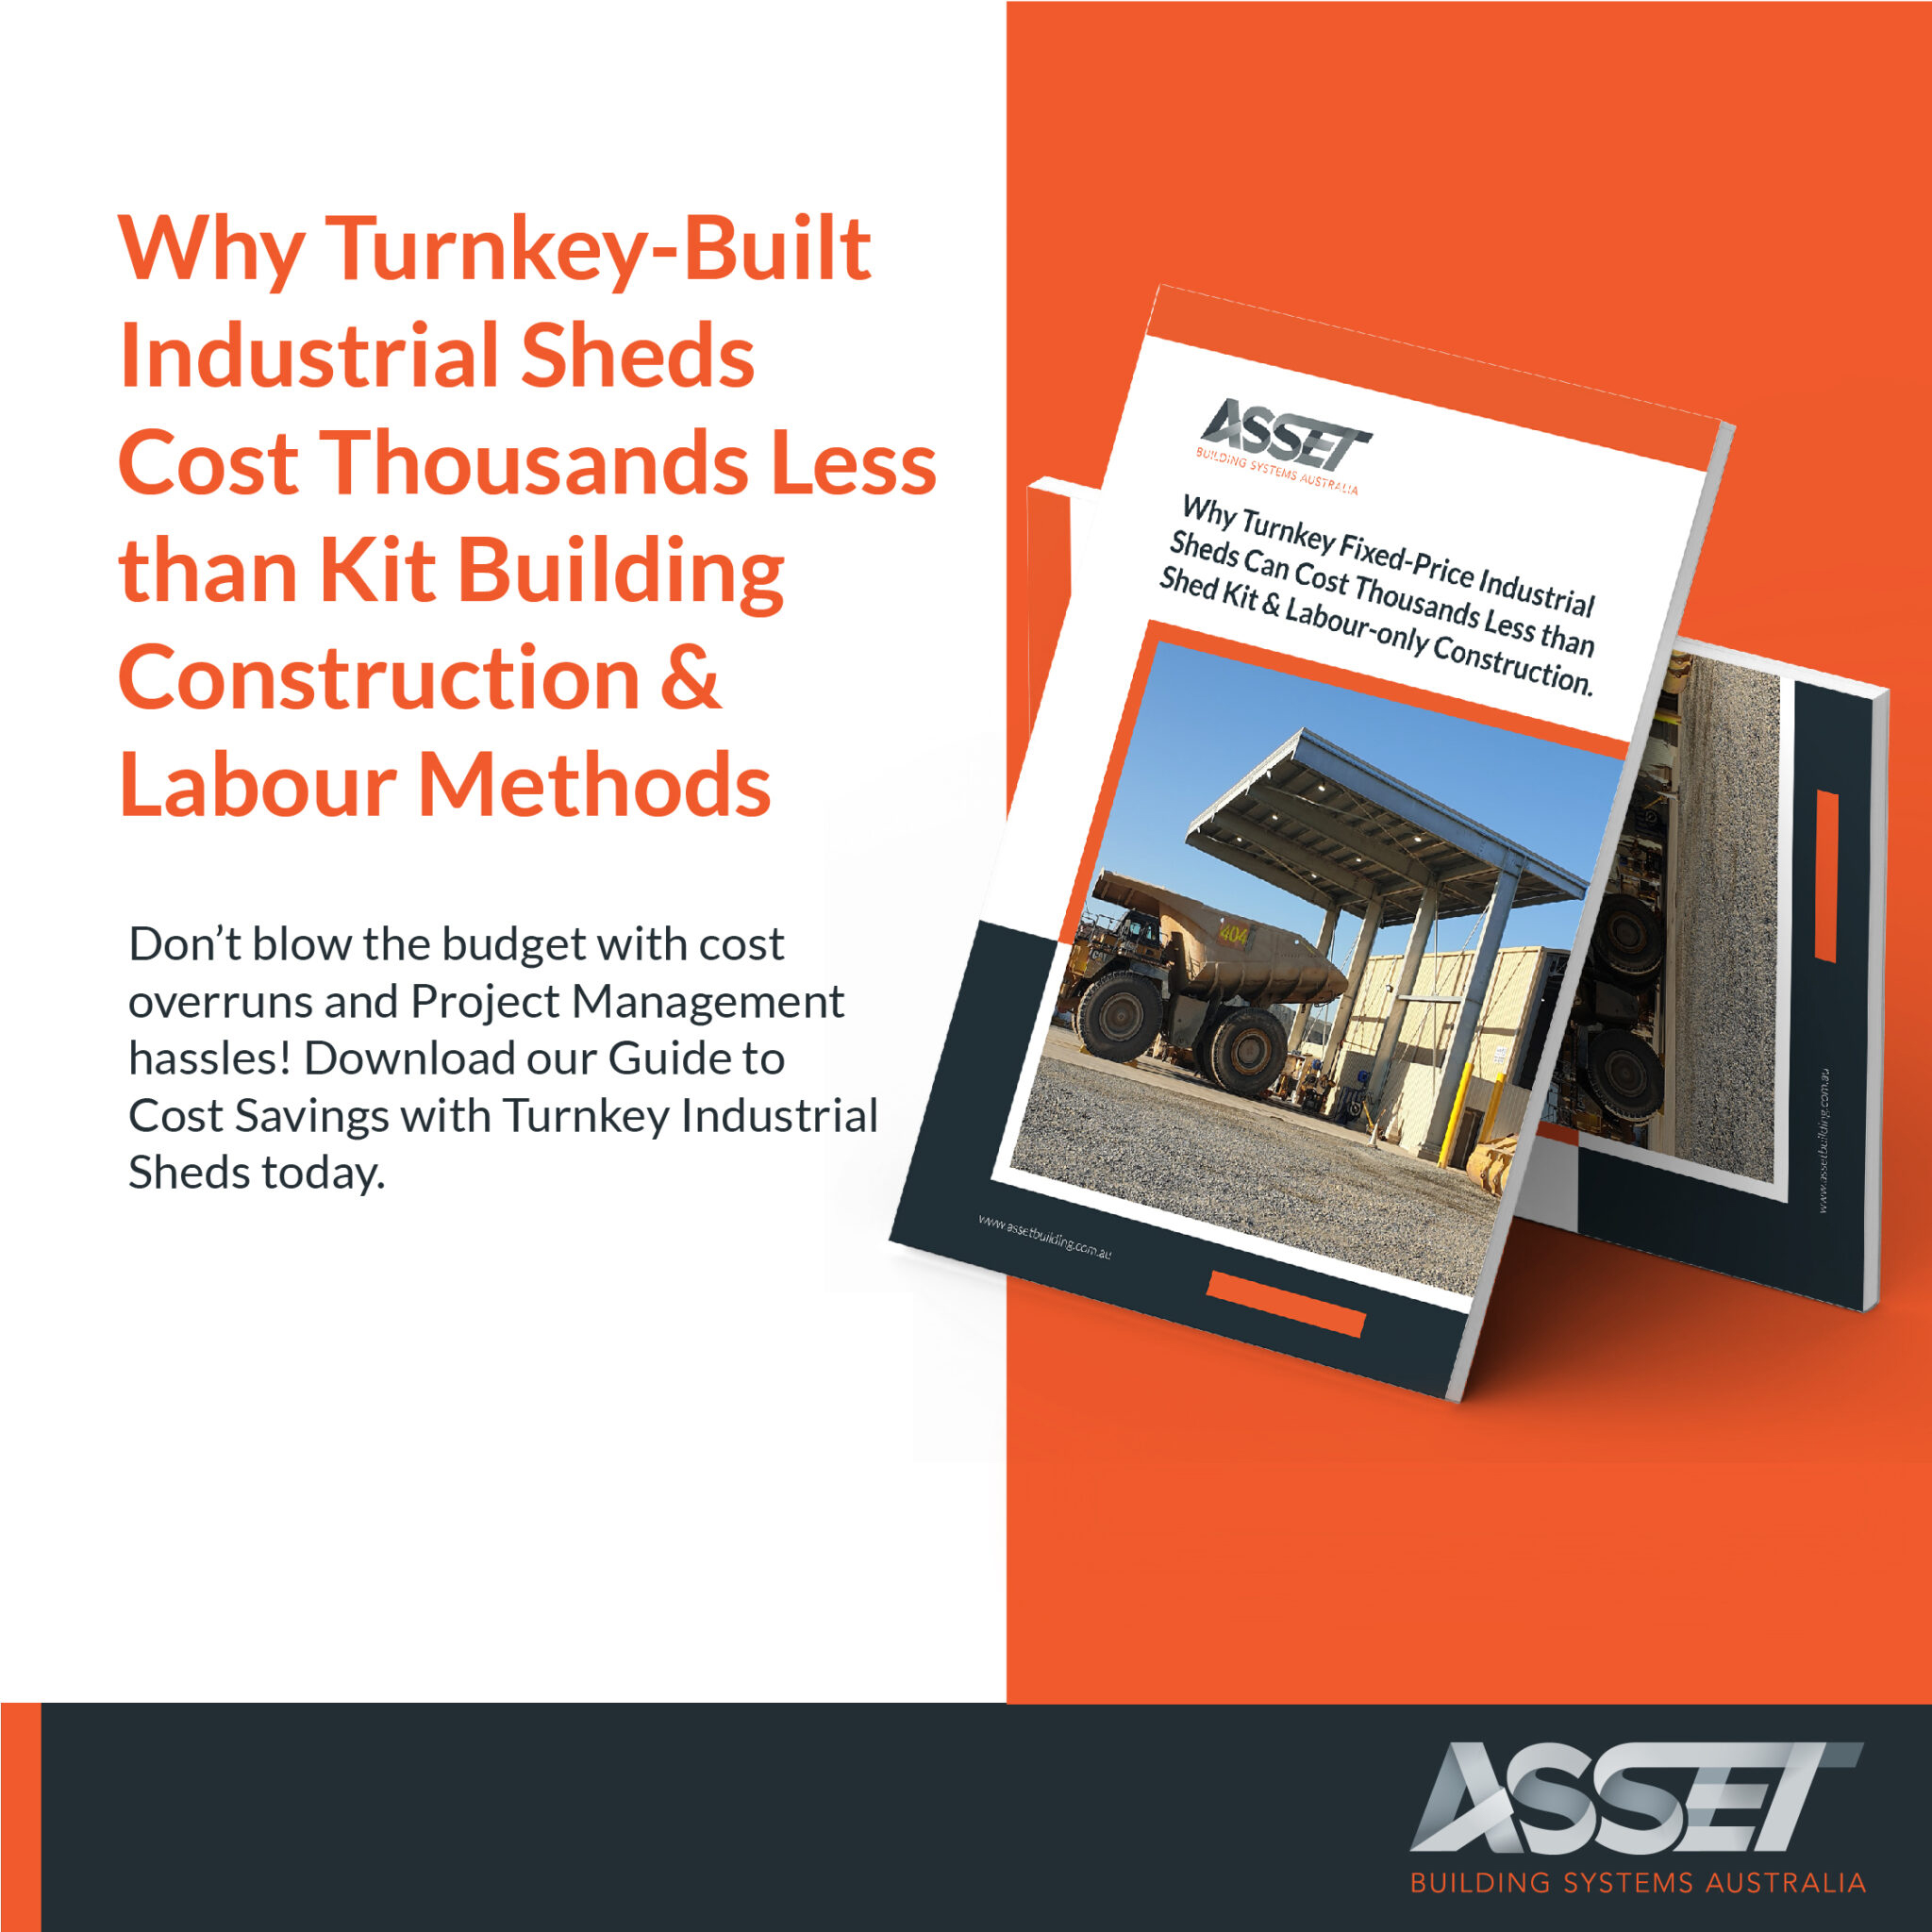 Turnkey Industrial Built Shed Contractors